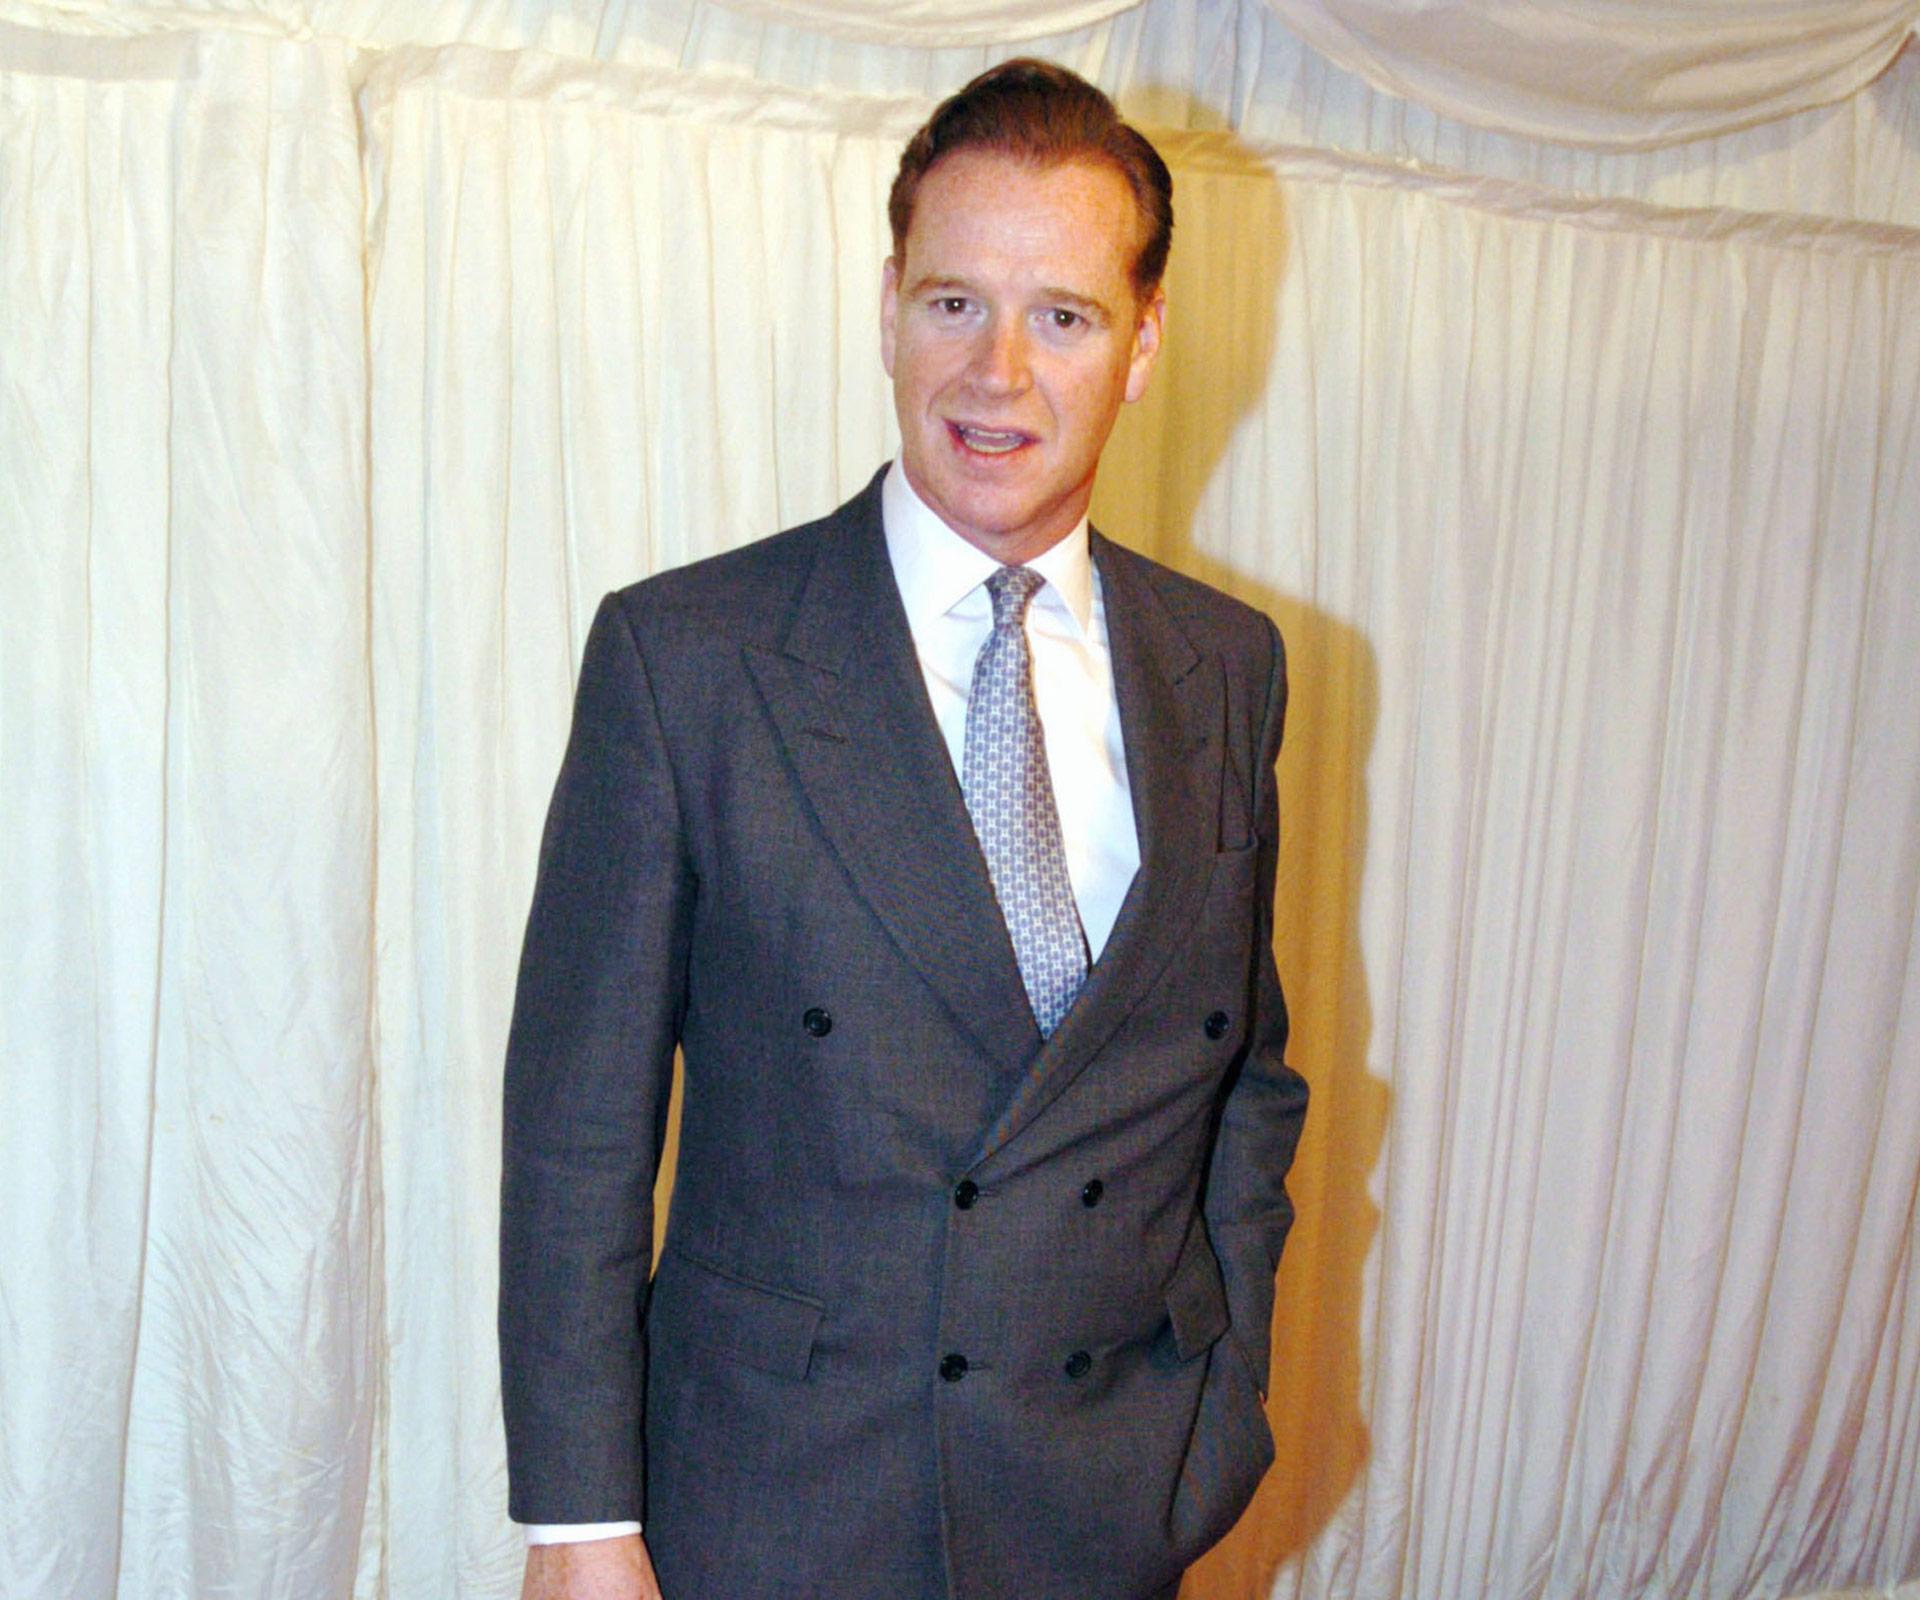 Princess Diana’s former lover James Hewitt suffers a stroke and heart attack